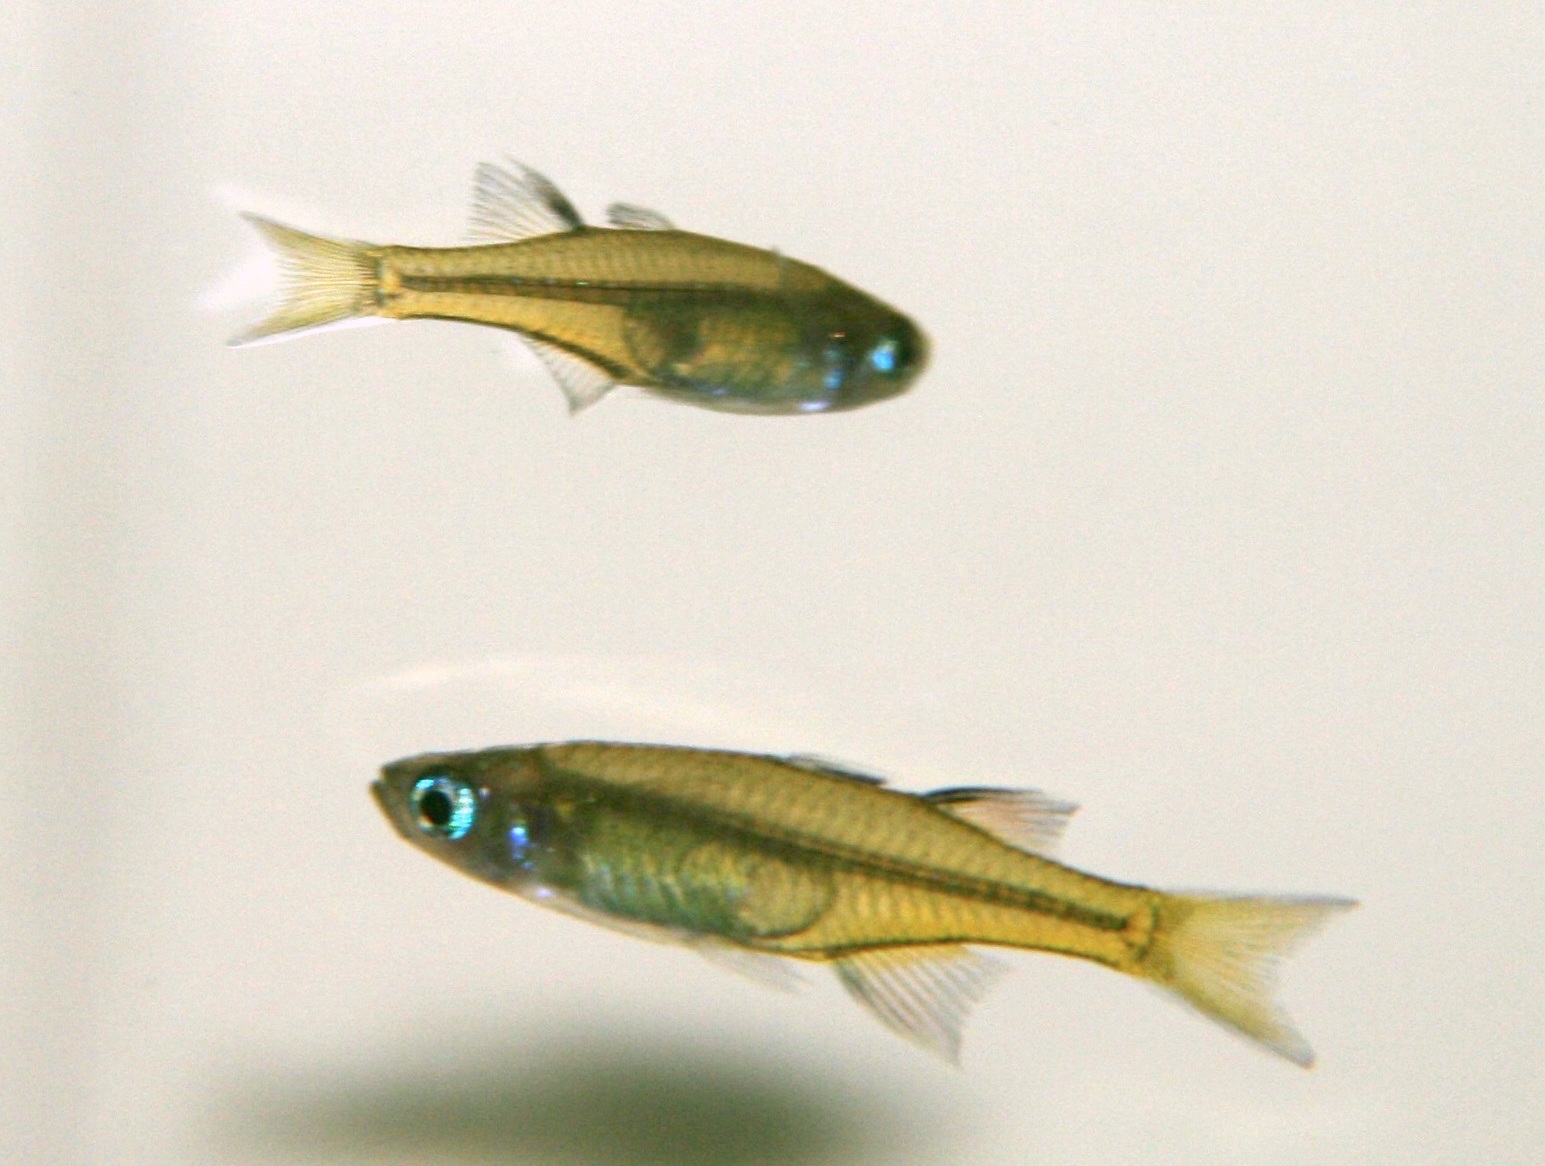 How Do Eastern Rainbowfish Adapt to the Changes in Australia's